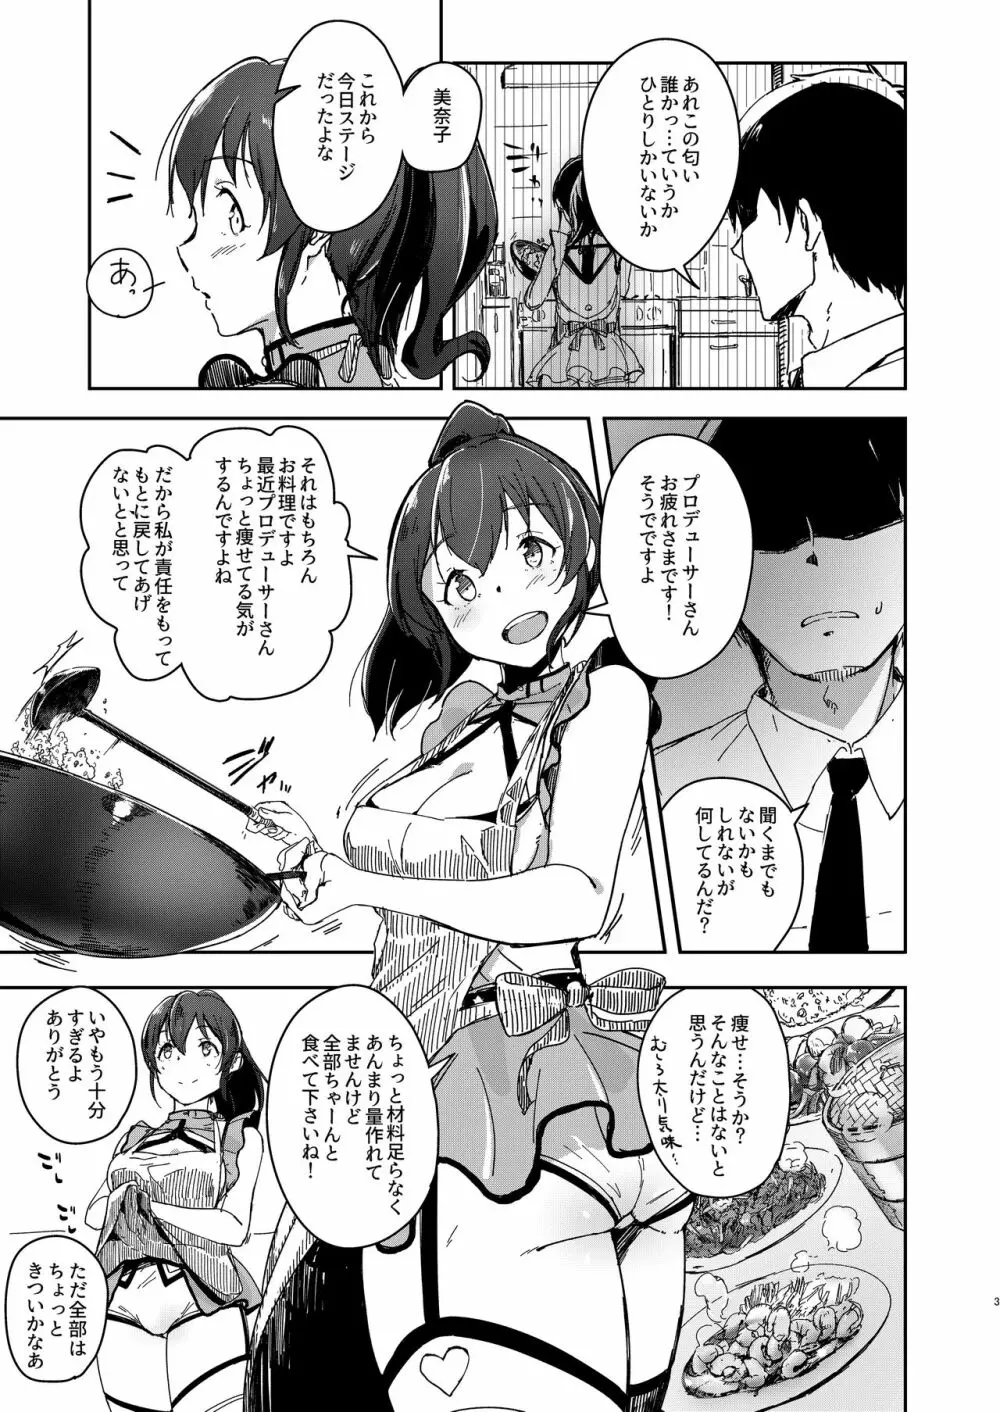 TOP! CLOVER BOOK + おまけ - page2